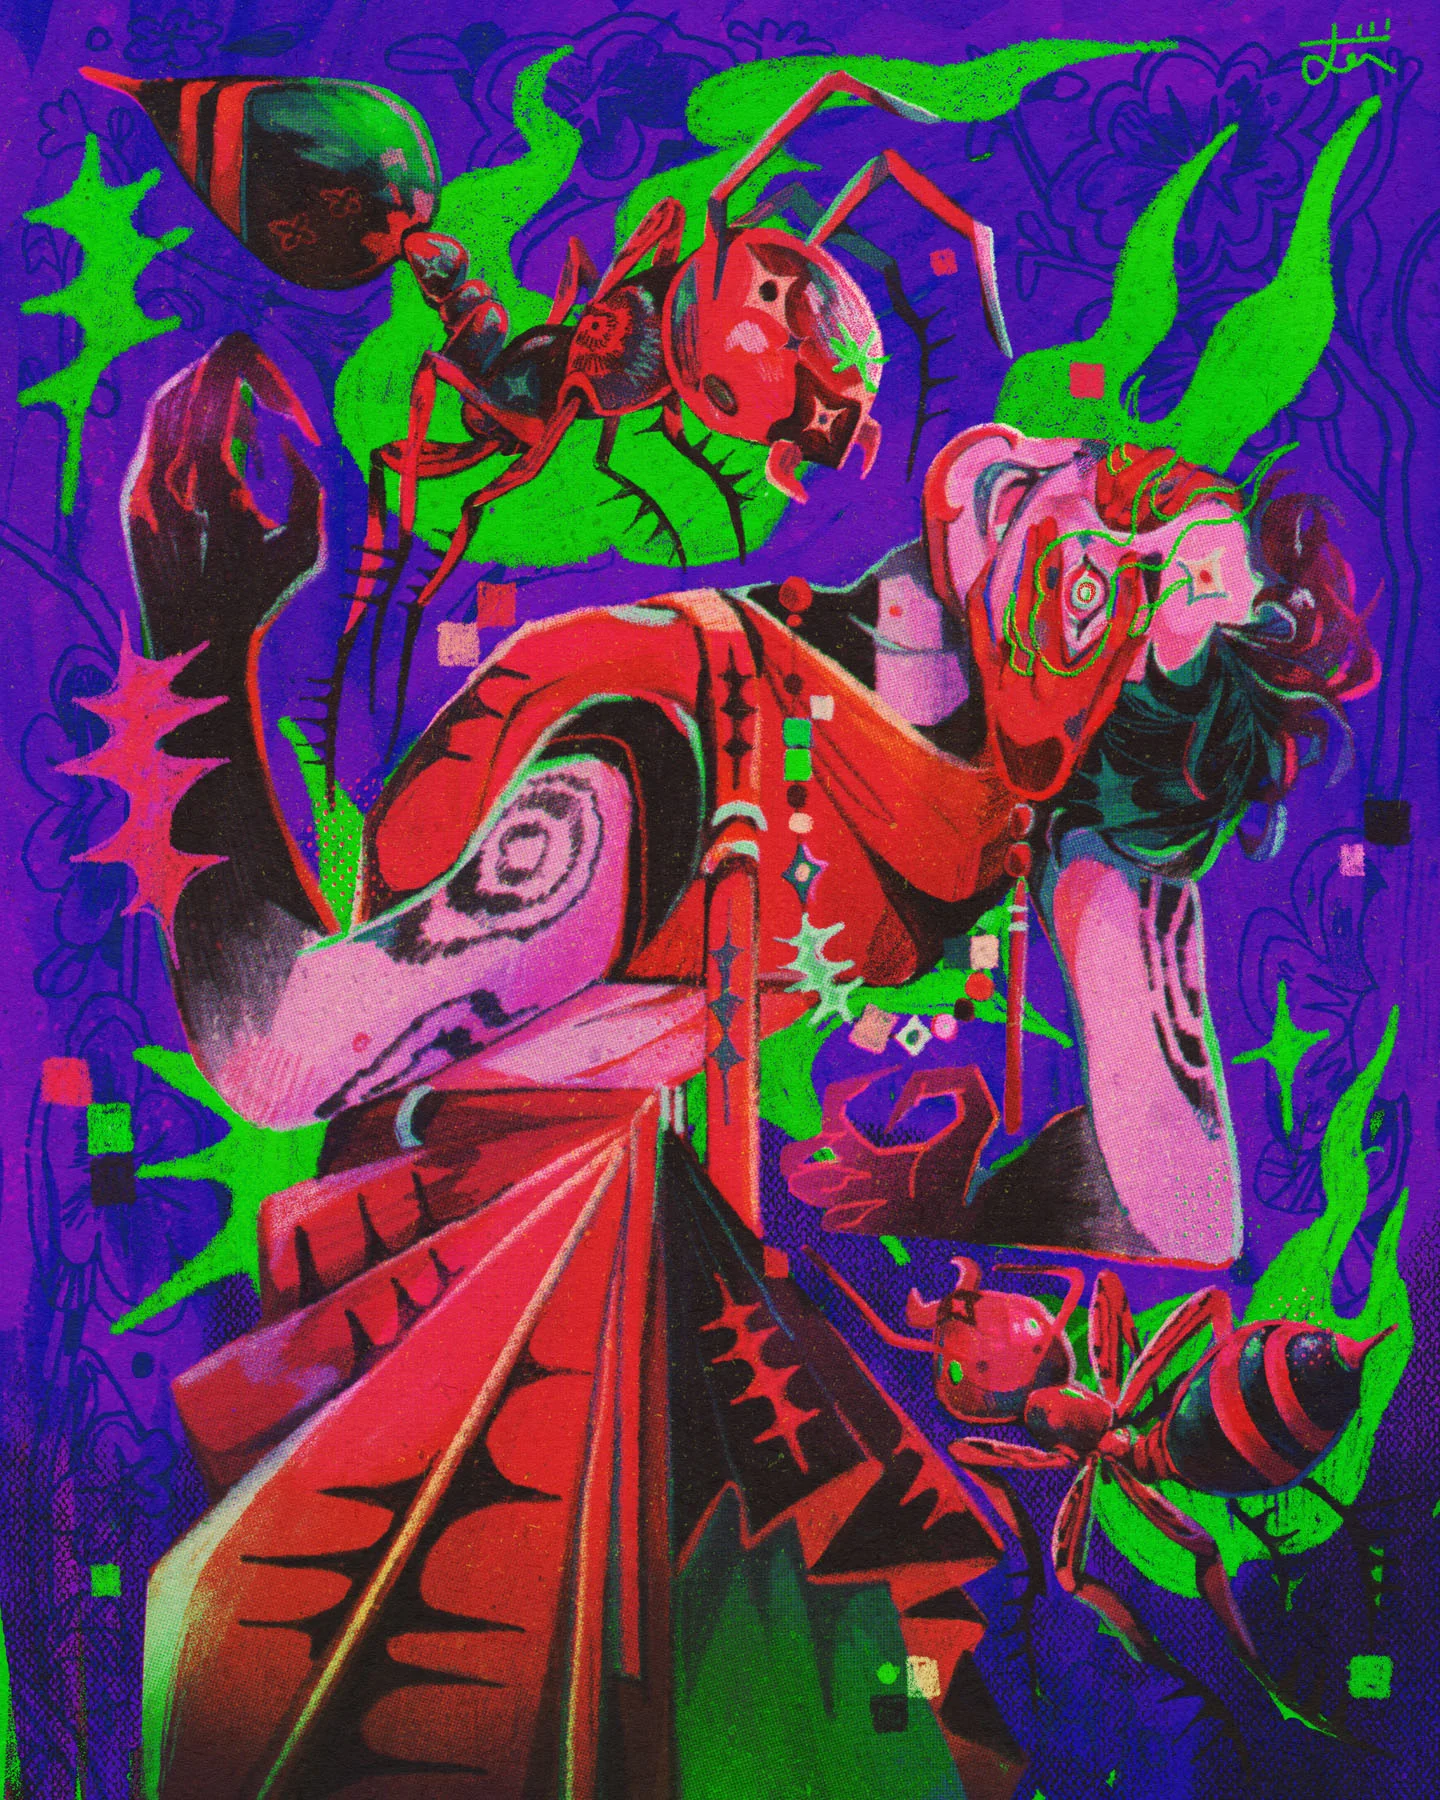 An illustration of a man with one eye covered by a red hand and the other covered by green flames. He is surrounded by fire ants before a dark purple background that features Petunia-inspired line art.
